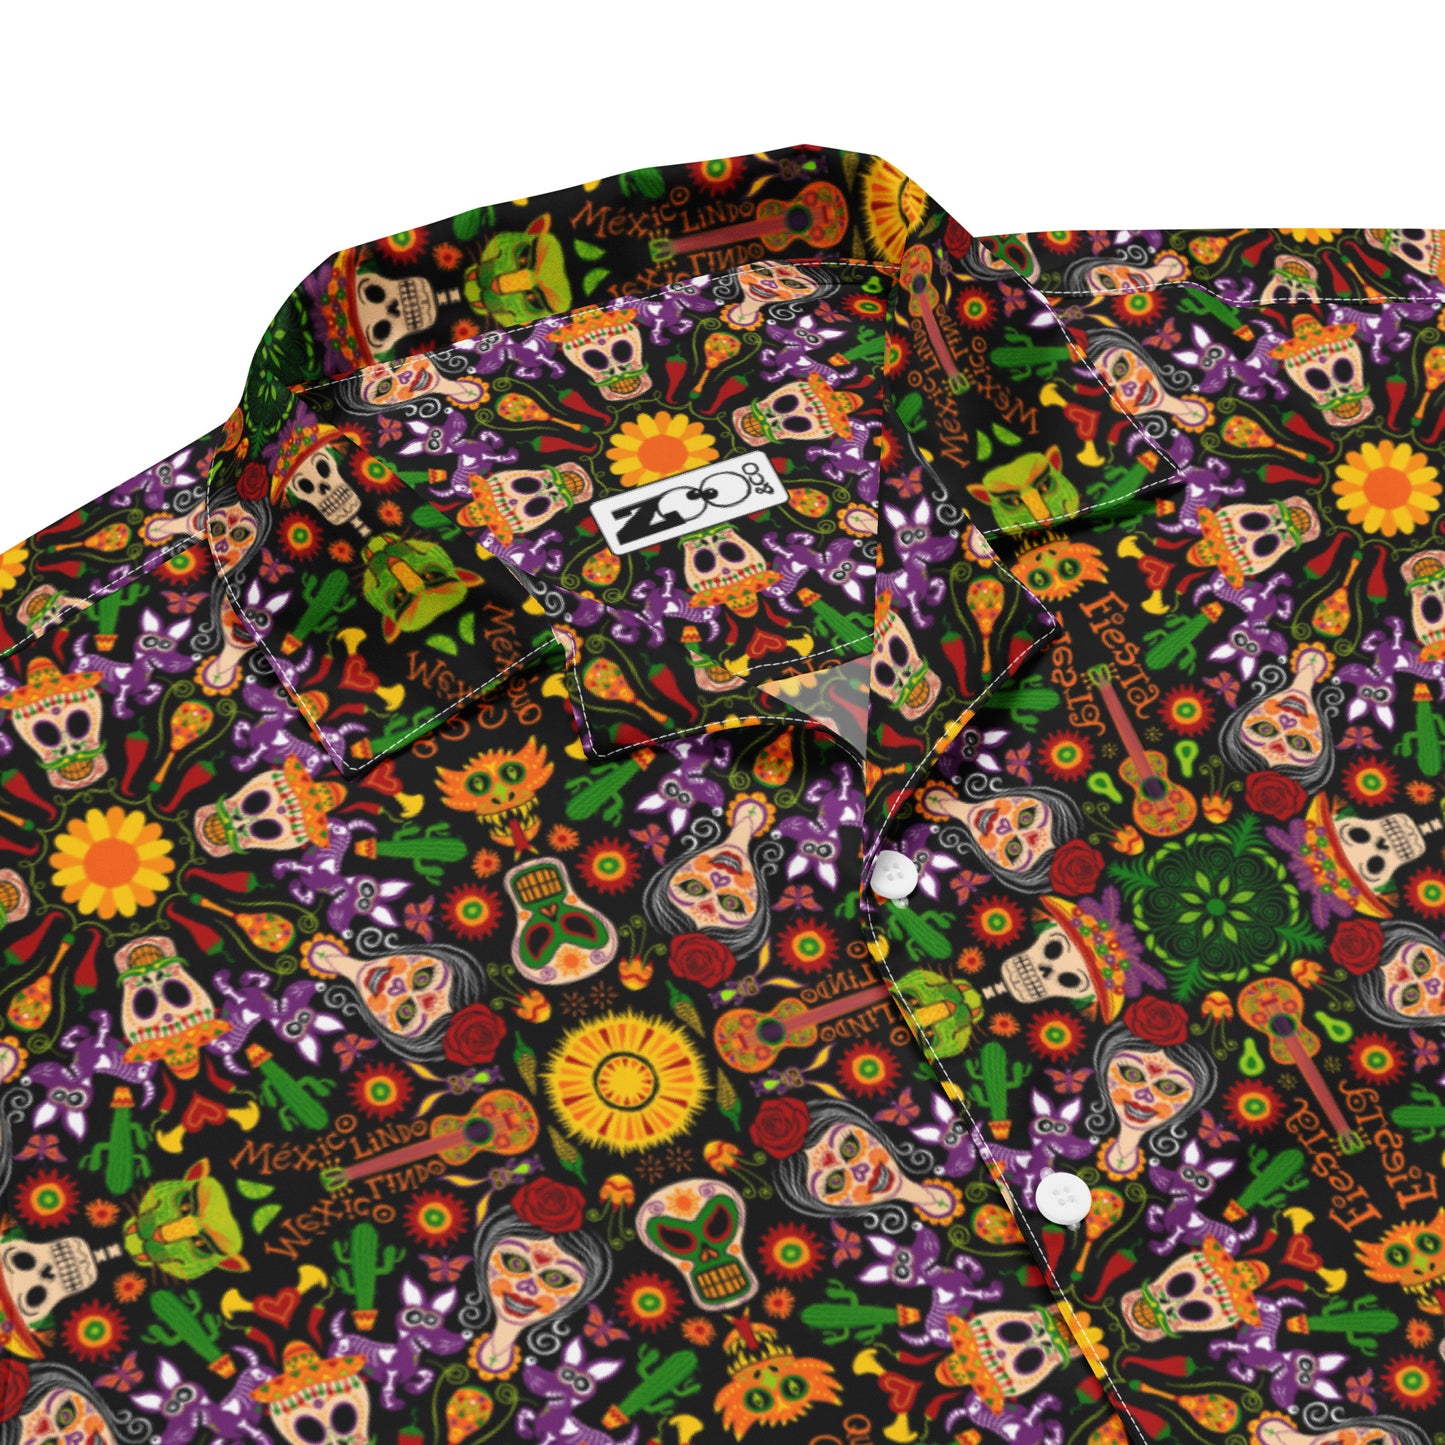 Mexican skulls celebrating the Day of the Dead Unisex button shirt. Product details